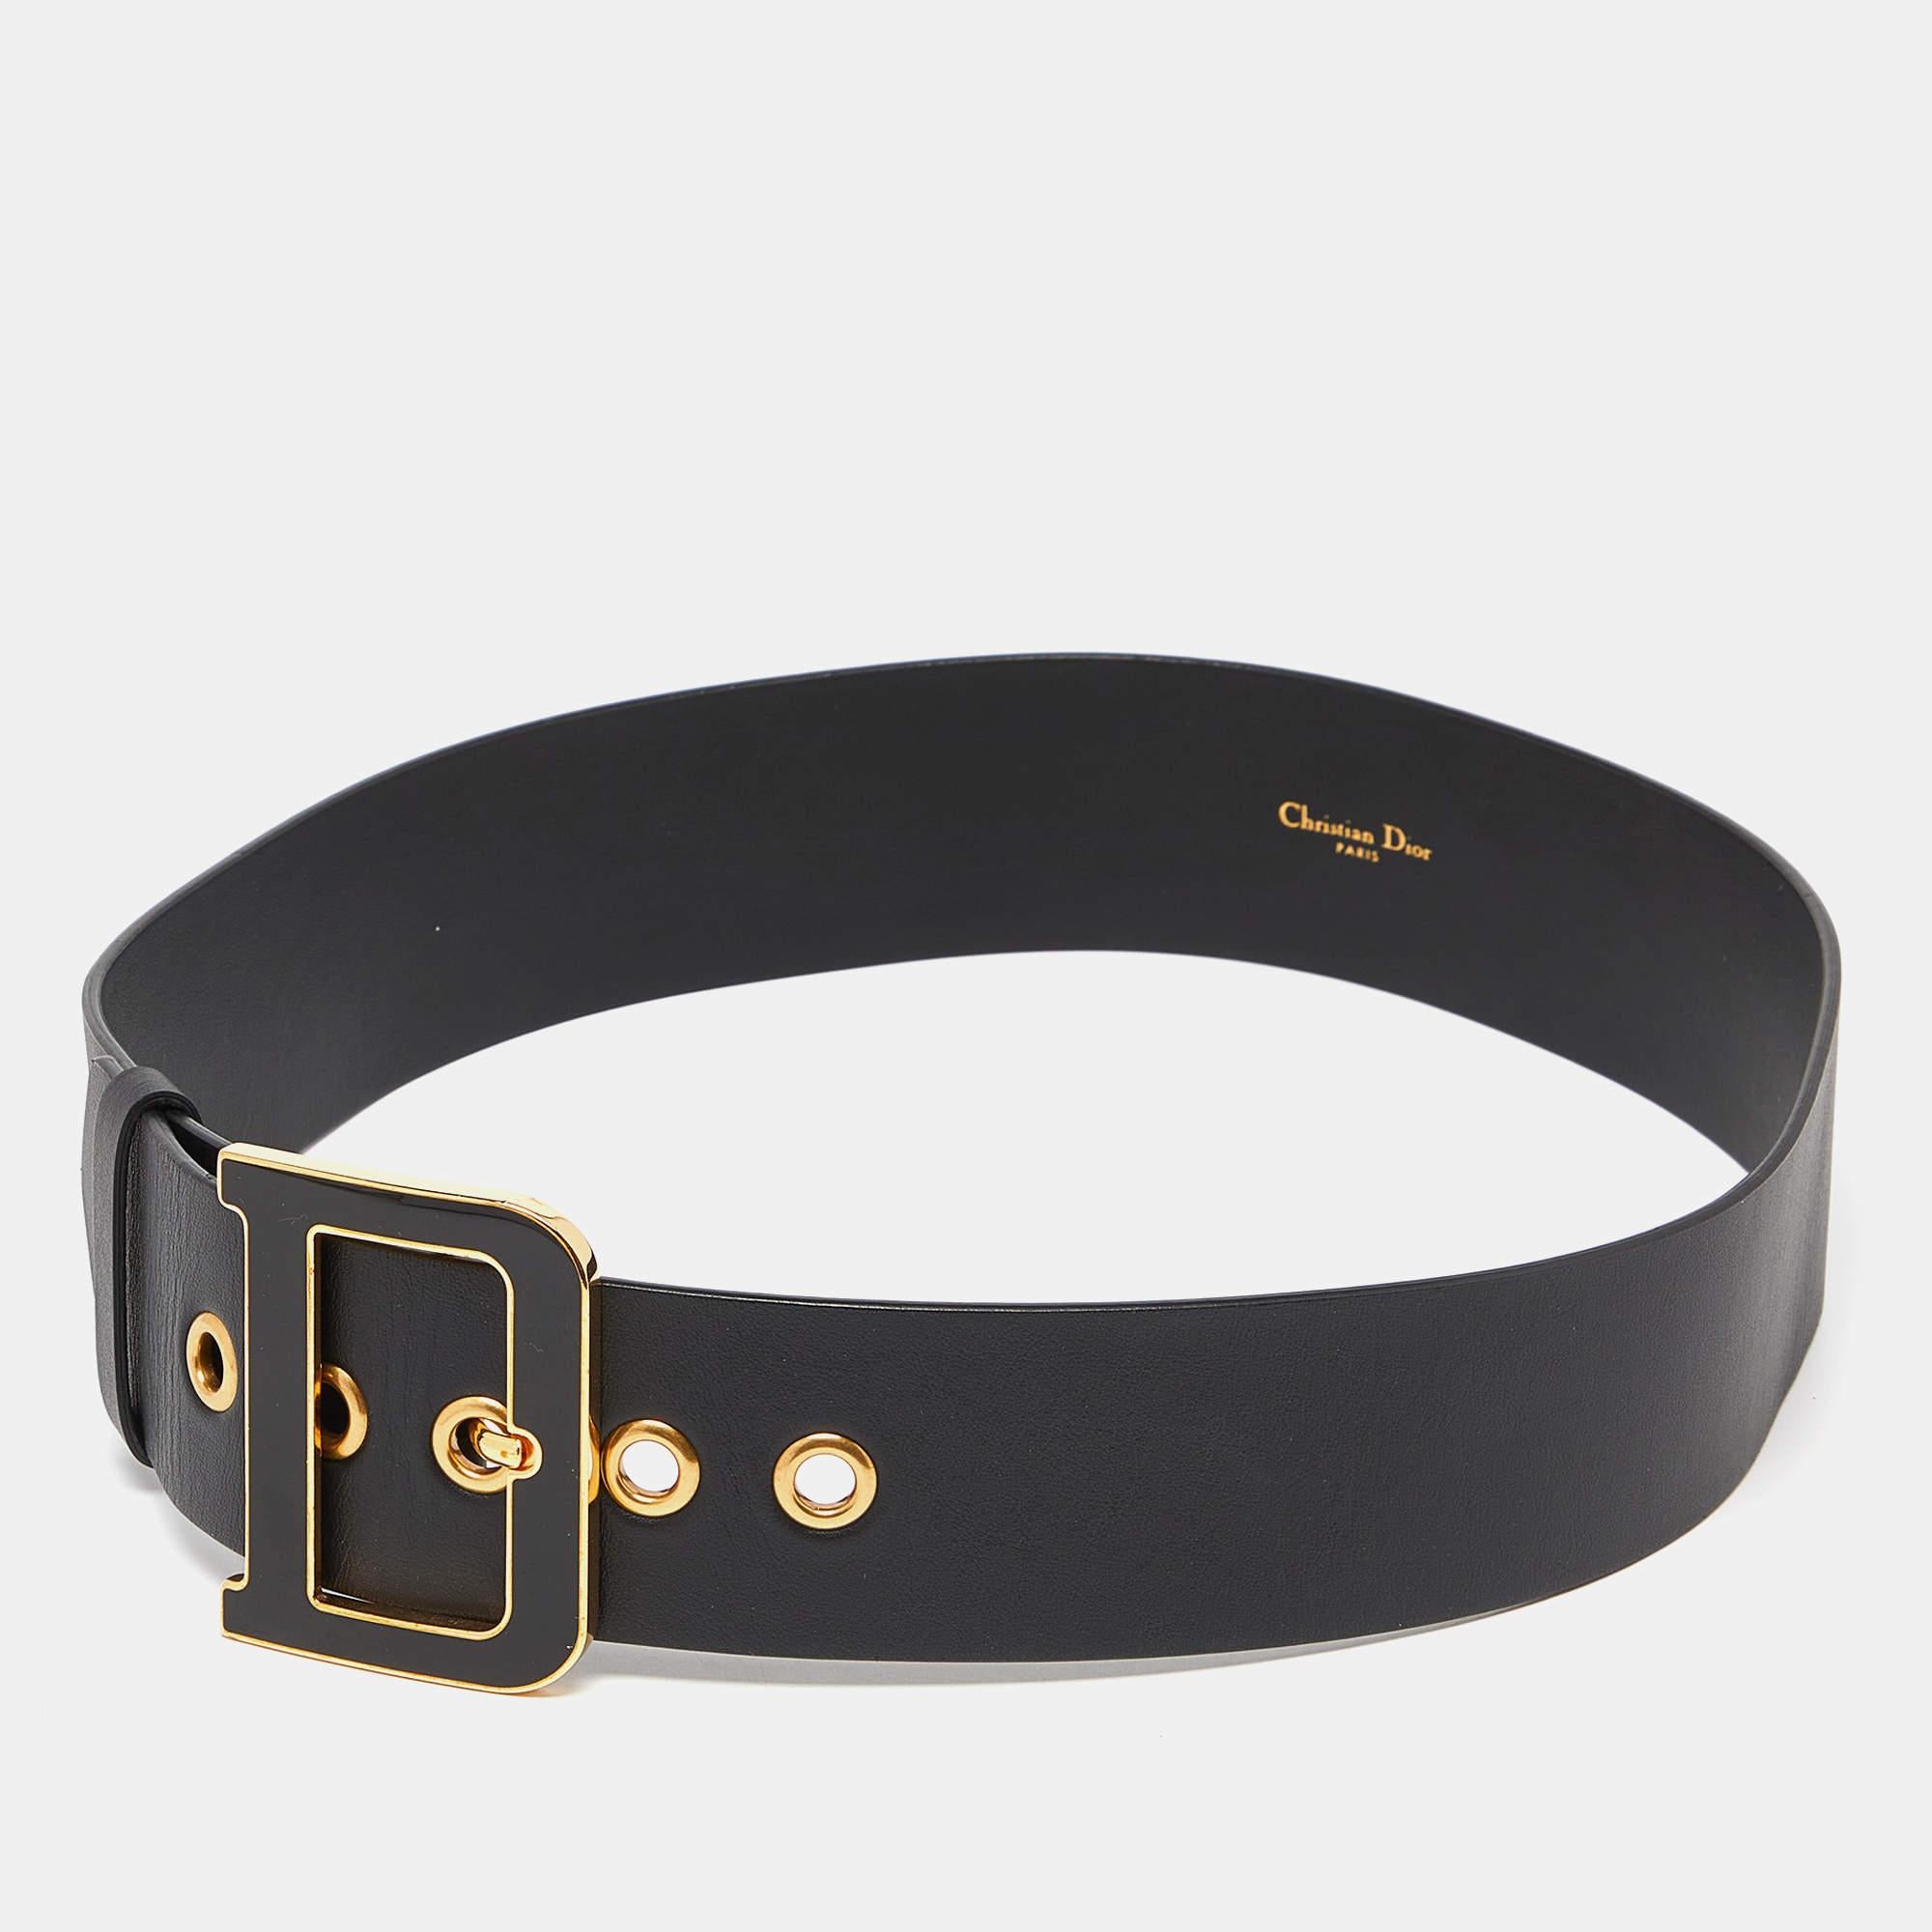 A classic add-on to your collection of belts is this designer piece. Cut to a convenient length, the belt has a smooth finish and a sturdy built. It will continually complement your style.

